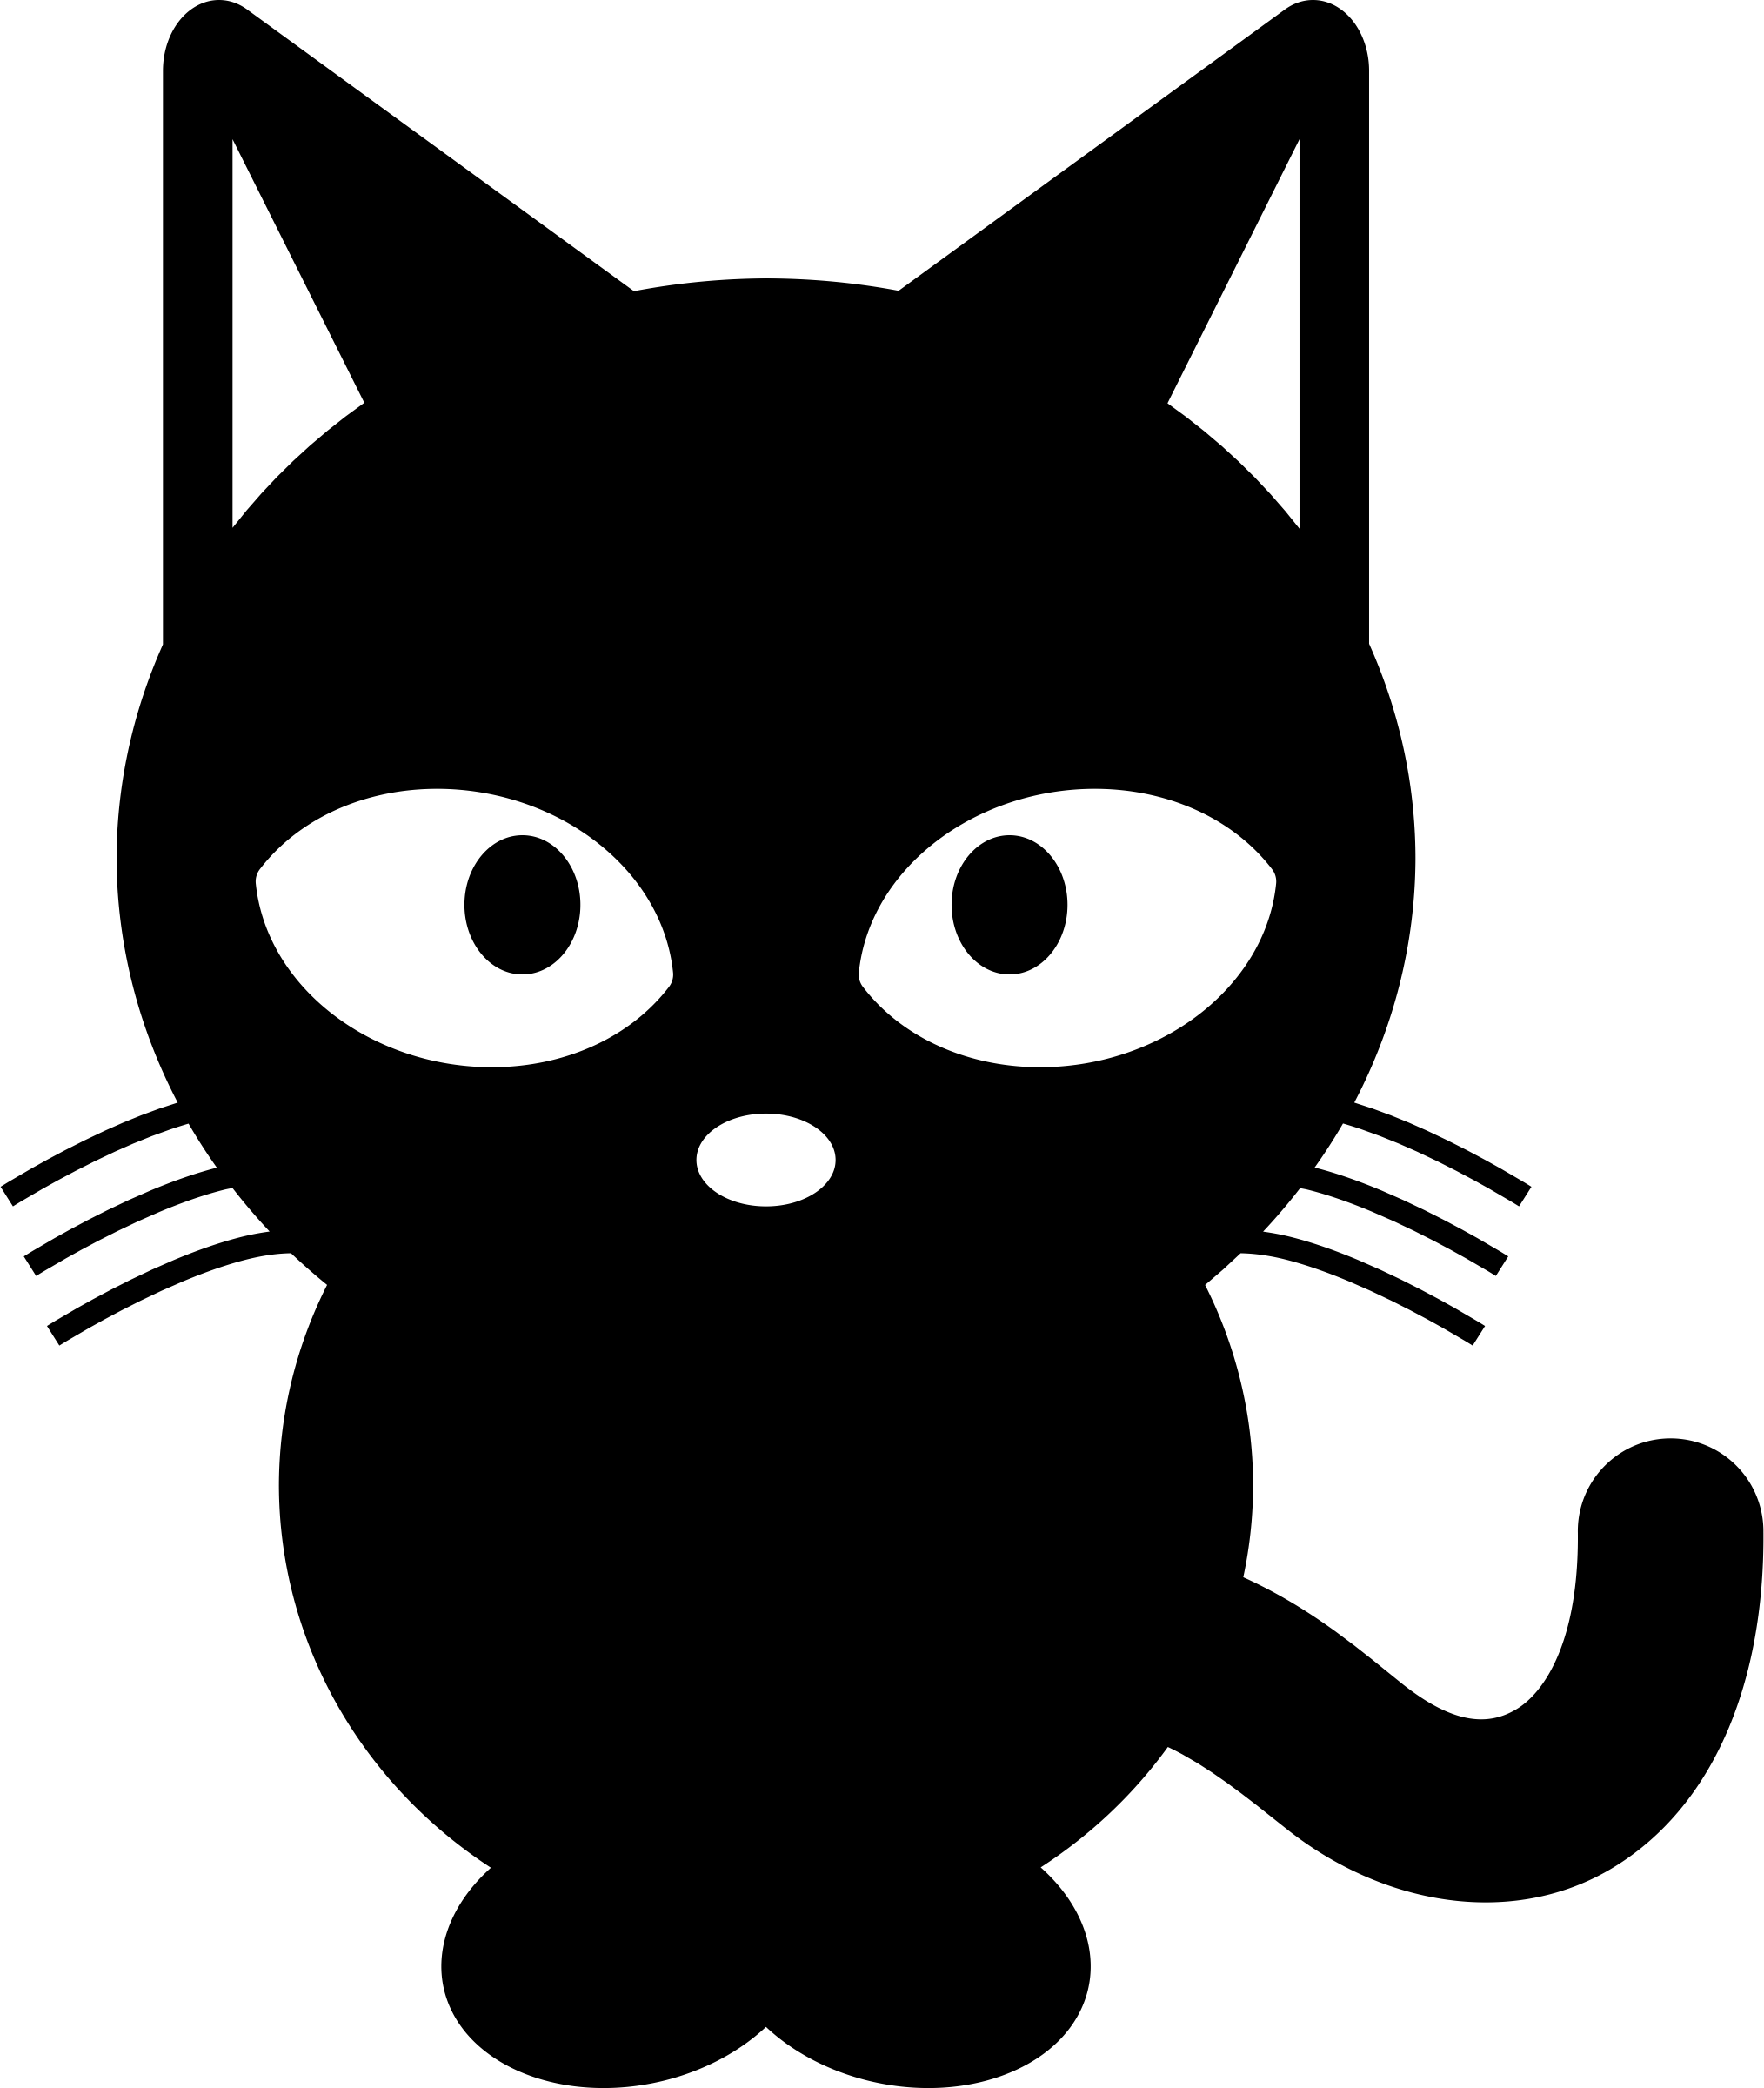 Black and White Cat Logo - Clipart Cat (black And White)